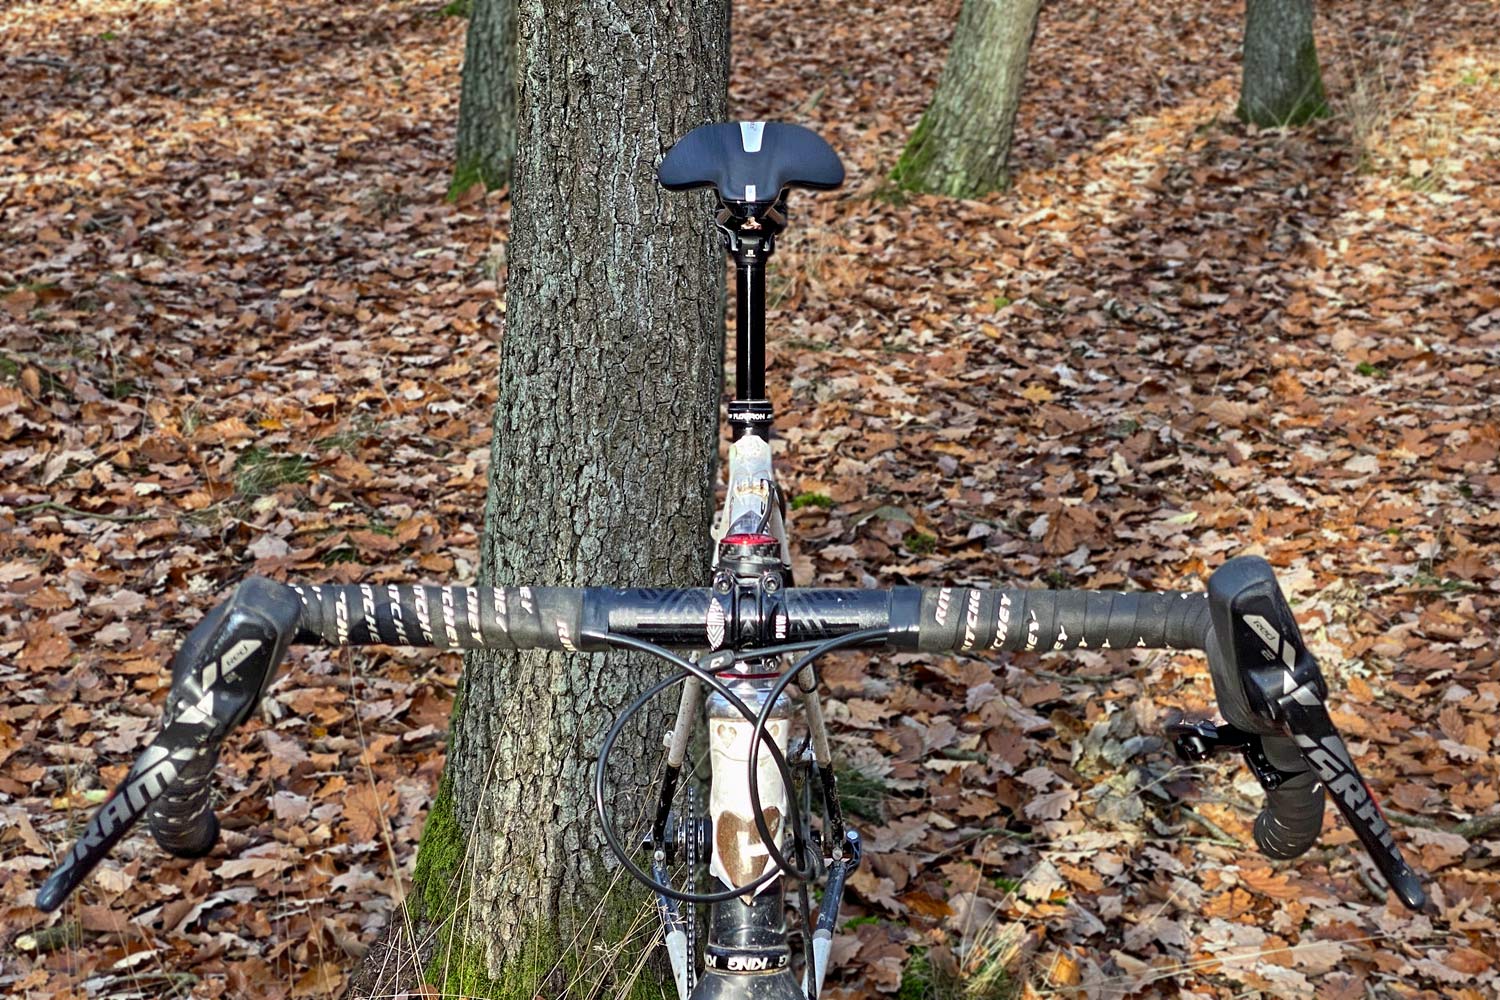 FSA Flowtron AGX gravel dropper post, First Look Review: 27.2mm internally routed dropper seatpost with dropbar remote